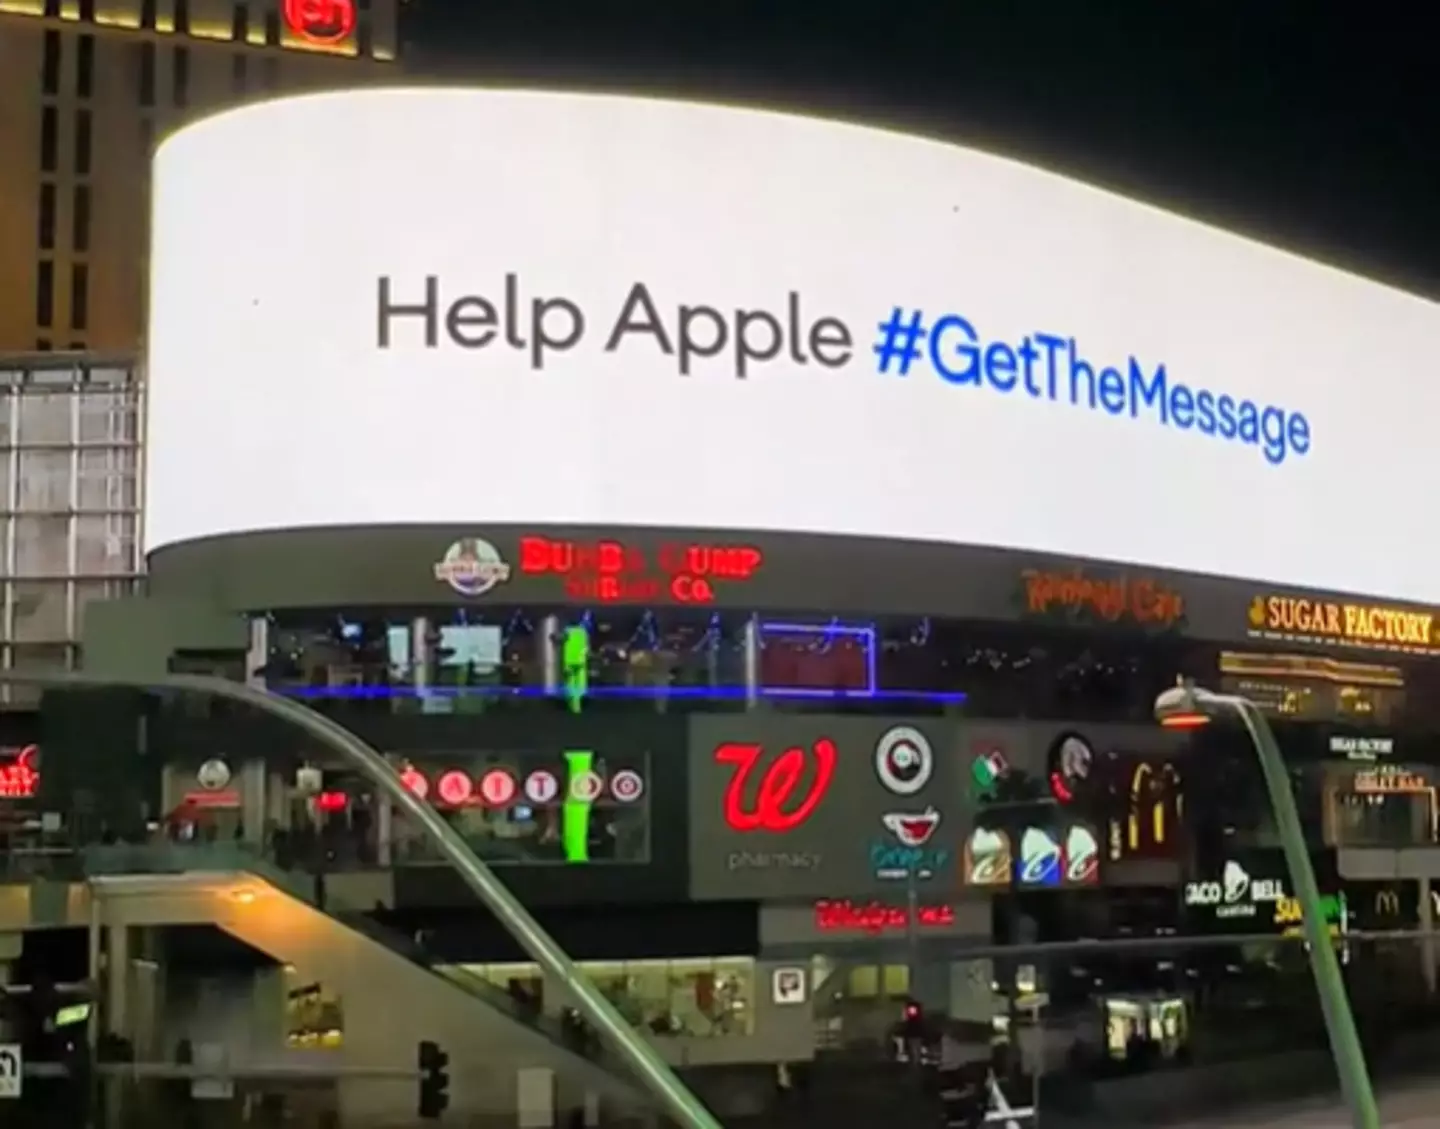 The ad for Android challenged Apple to 'get the message'.